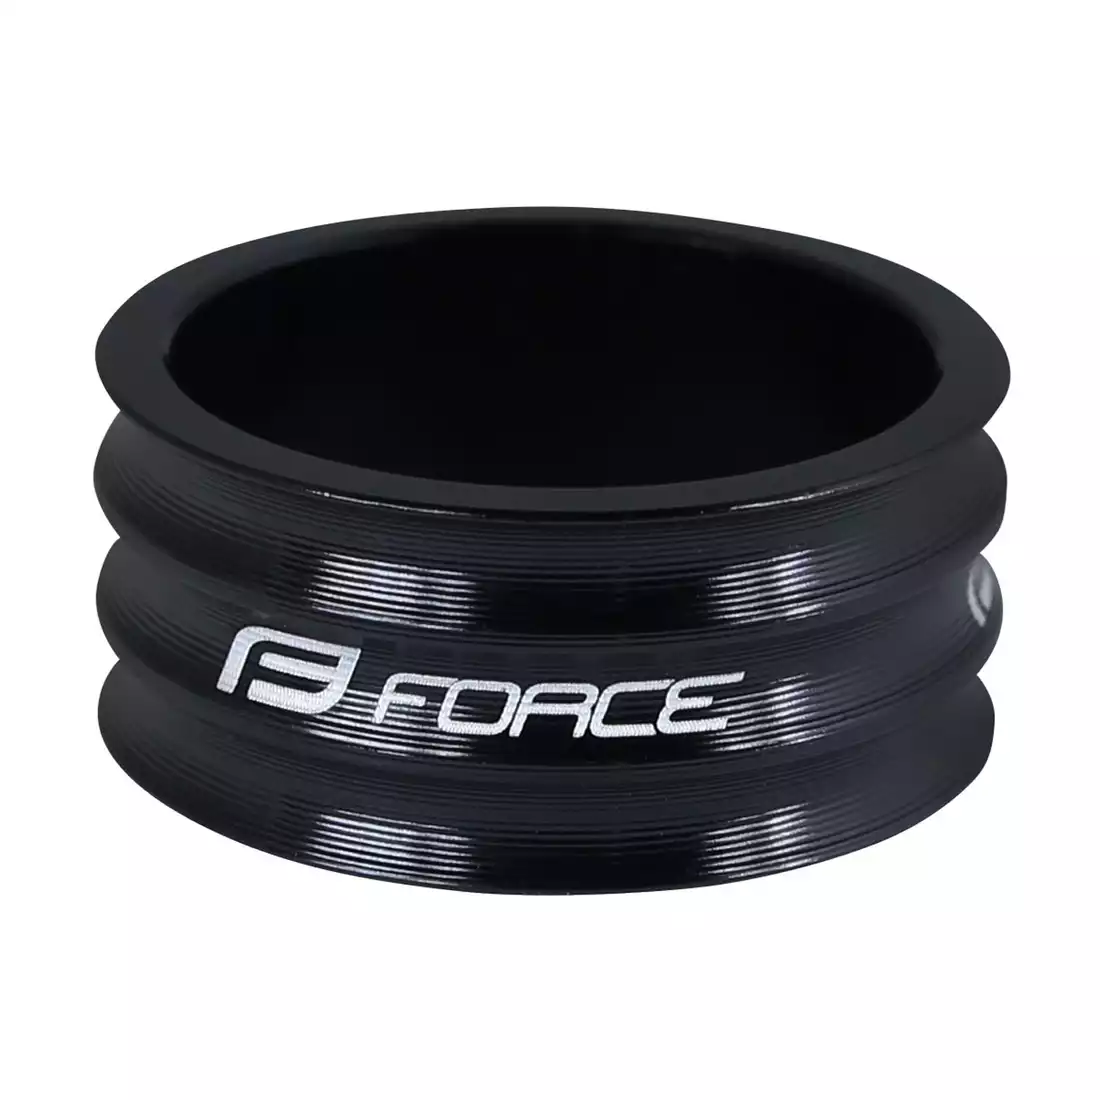 FORCE AHEAD Pad for bicycle rudders 1 1/8“, 15mm, black